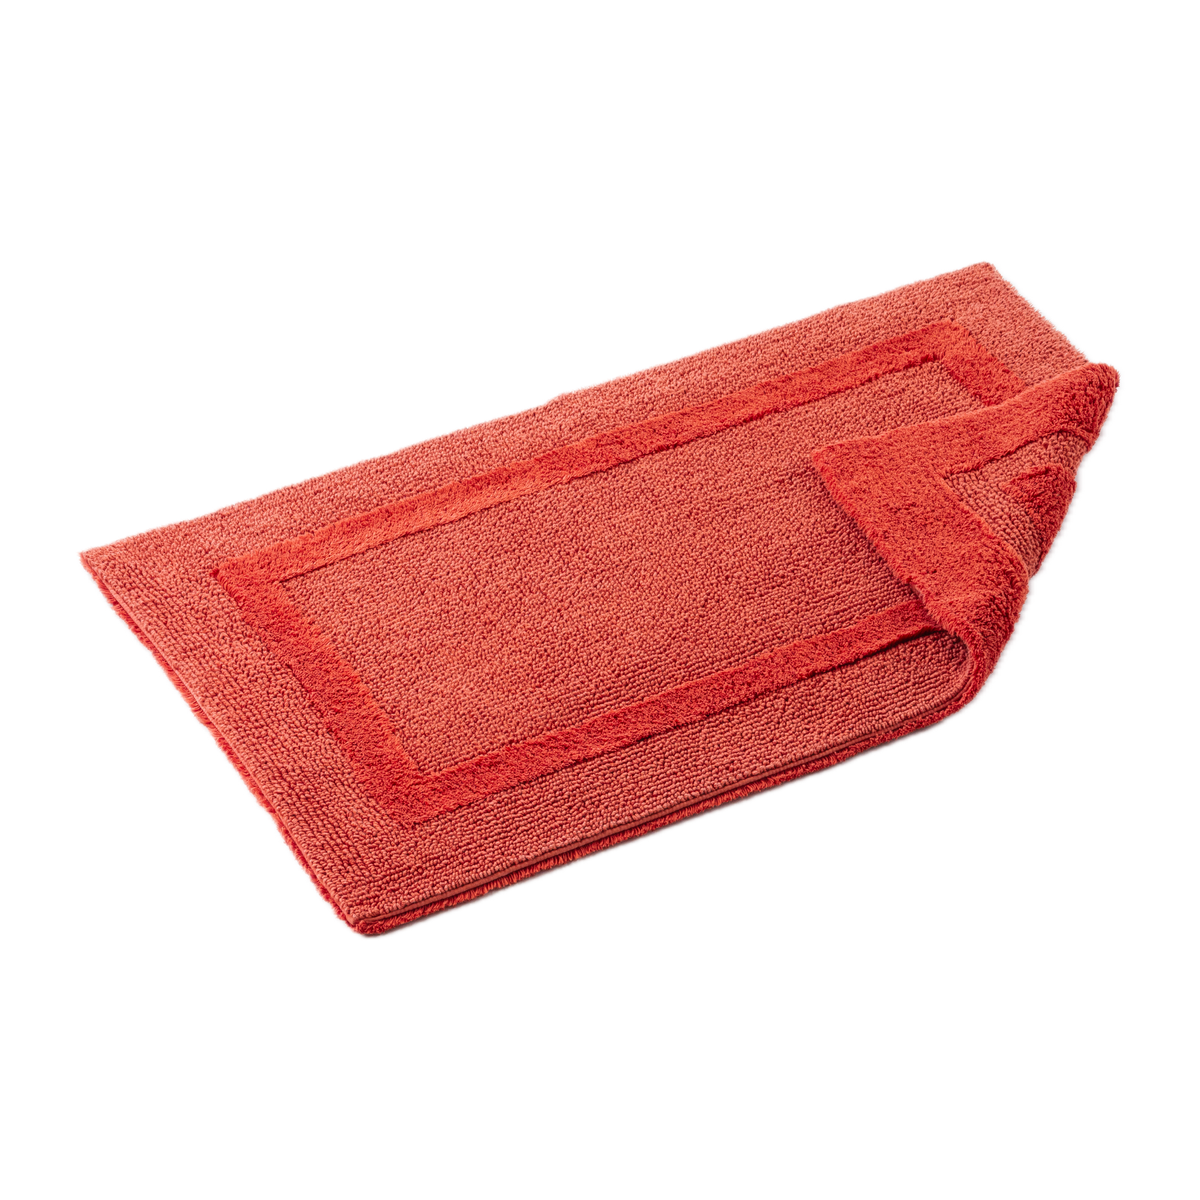 Tilted Image of Abyss Habidecor Reversible Bath Rug in Chili Color